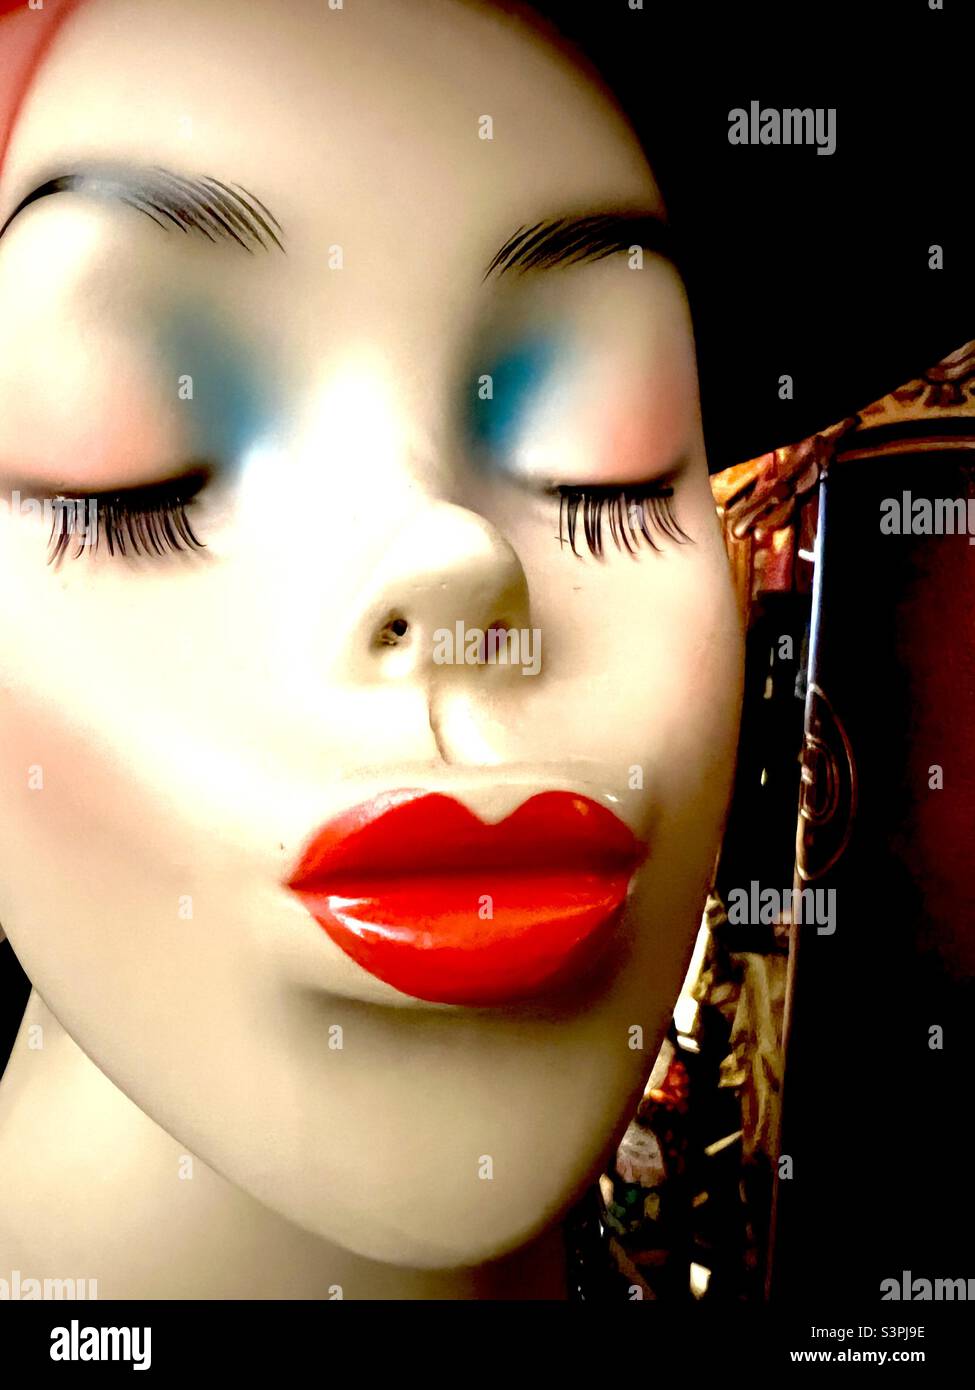 Mannequin head in makeup and red lipstick Stock Photo